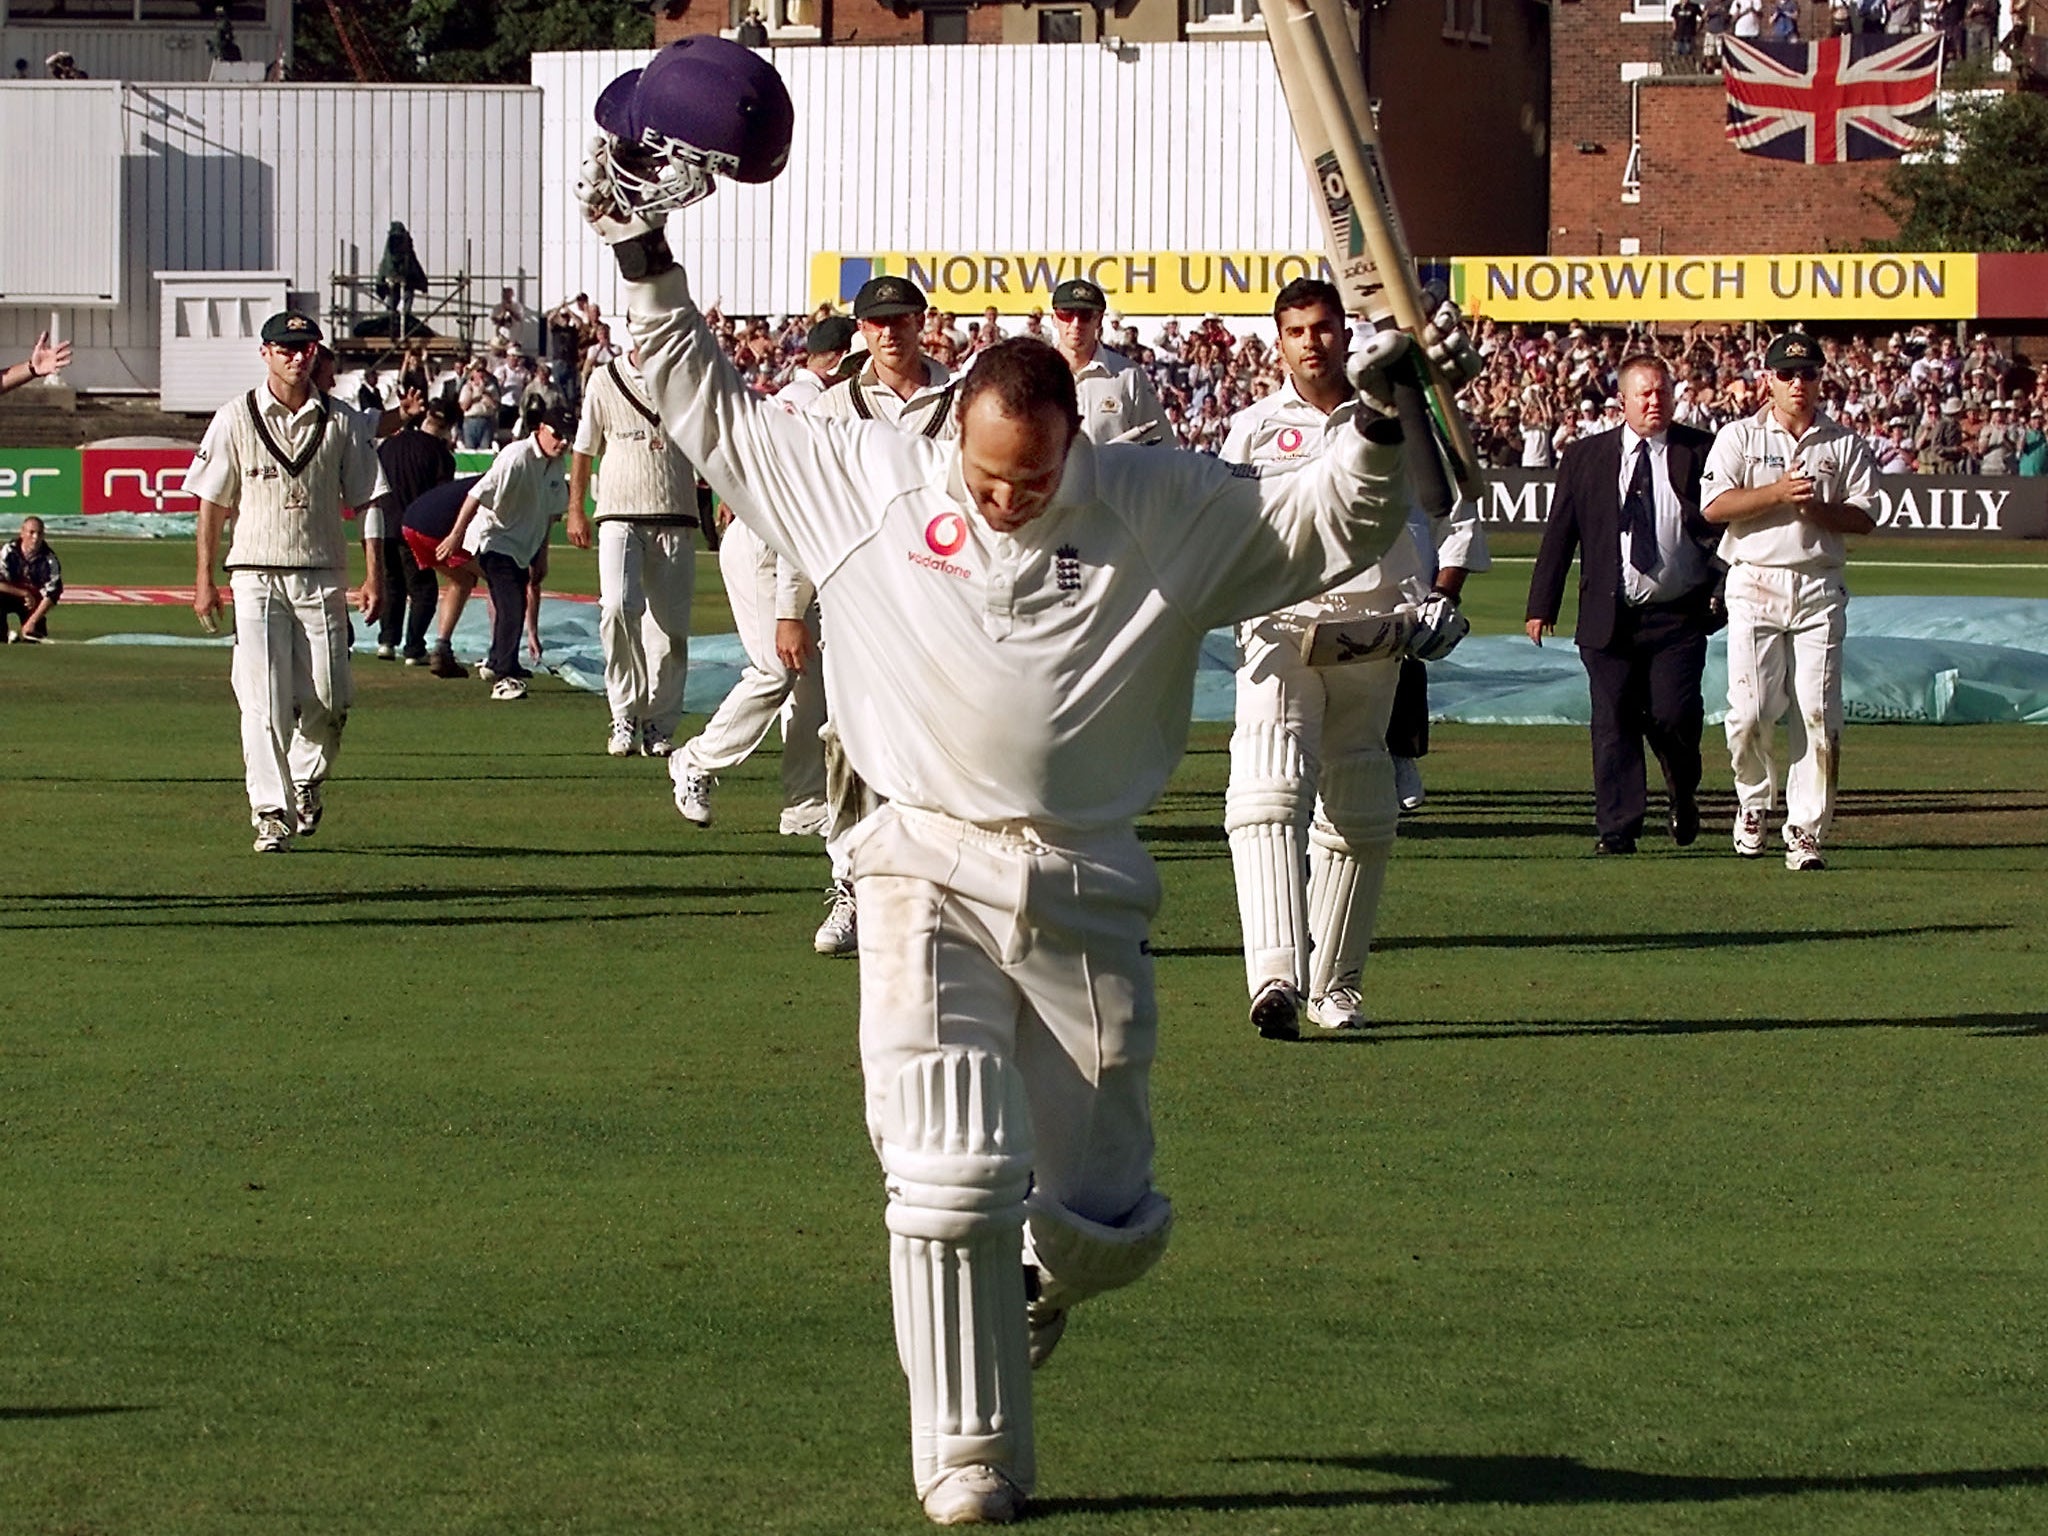 England batsman Mark Butcher runs from the field after steering England to victory over Australia with an innings of 173 not out on the final day of the fourth Test in 2001